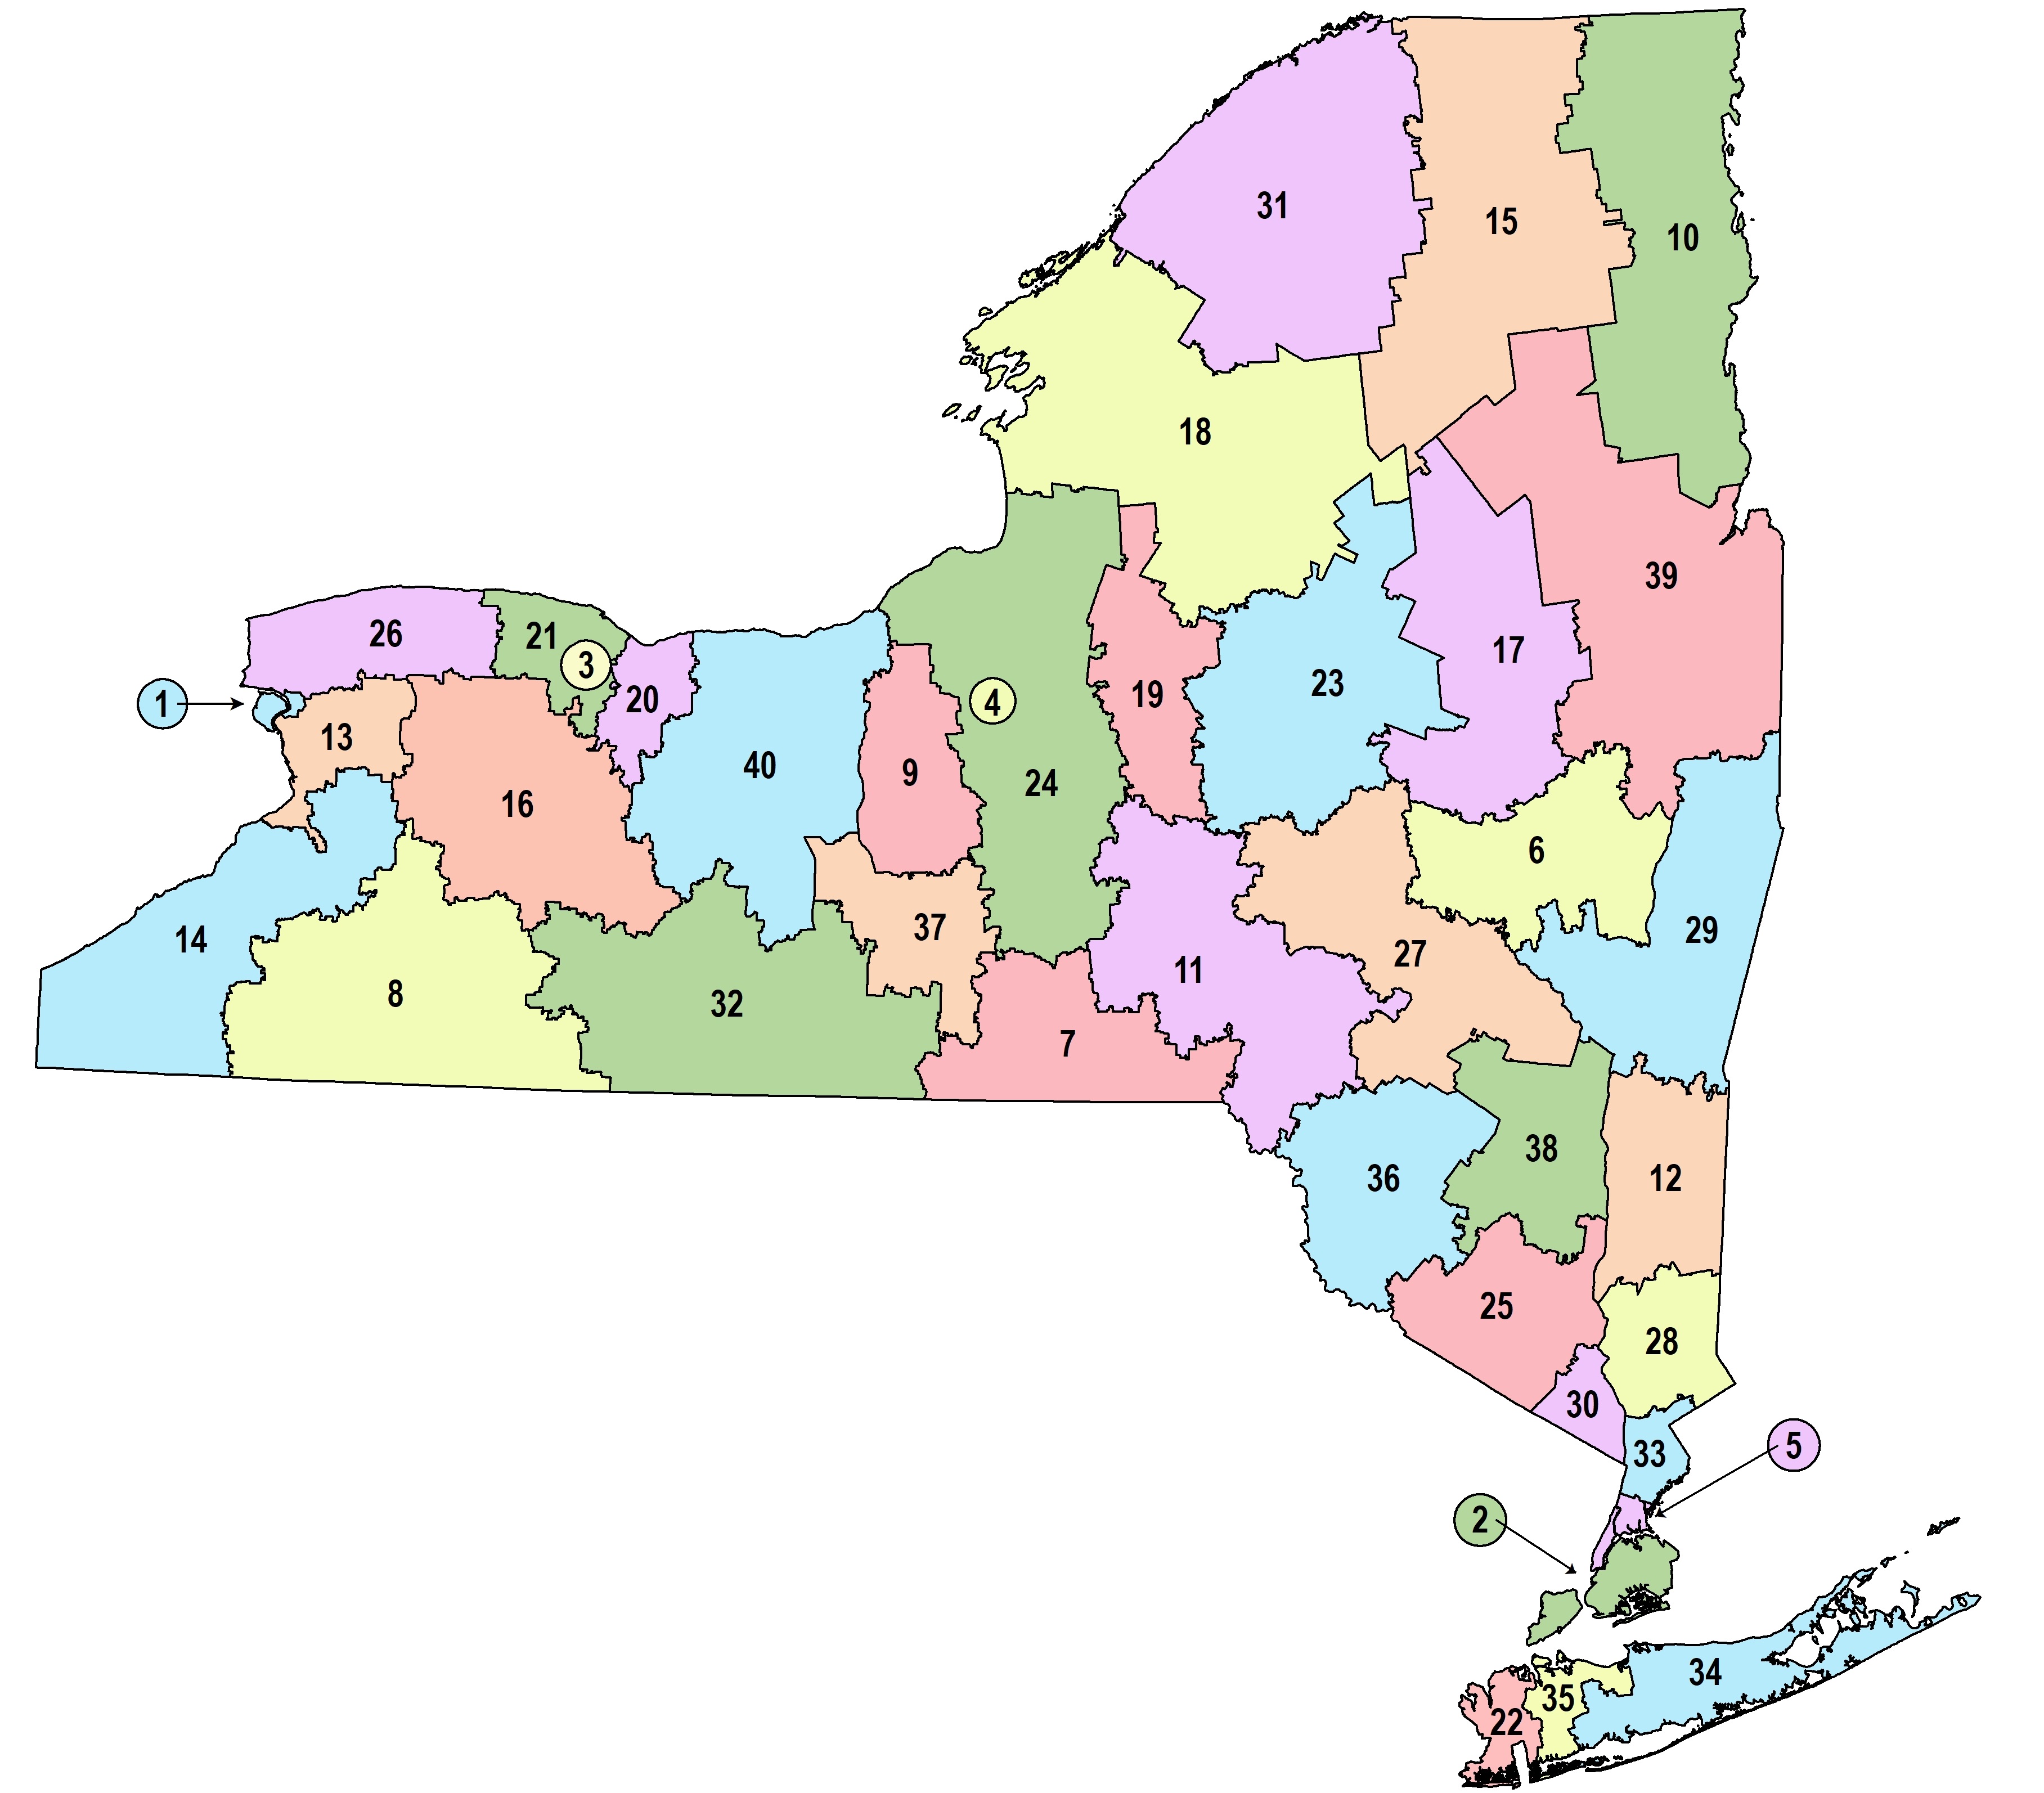 Image map of school library systems in New York State